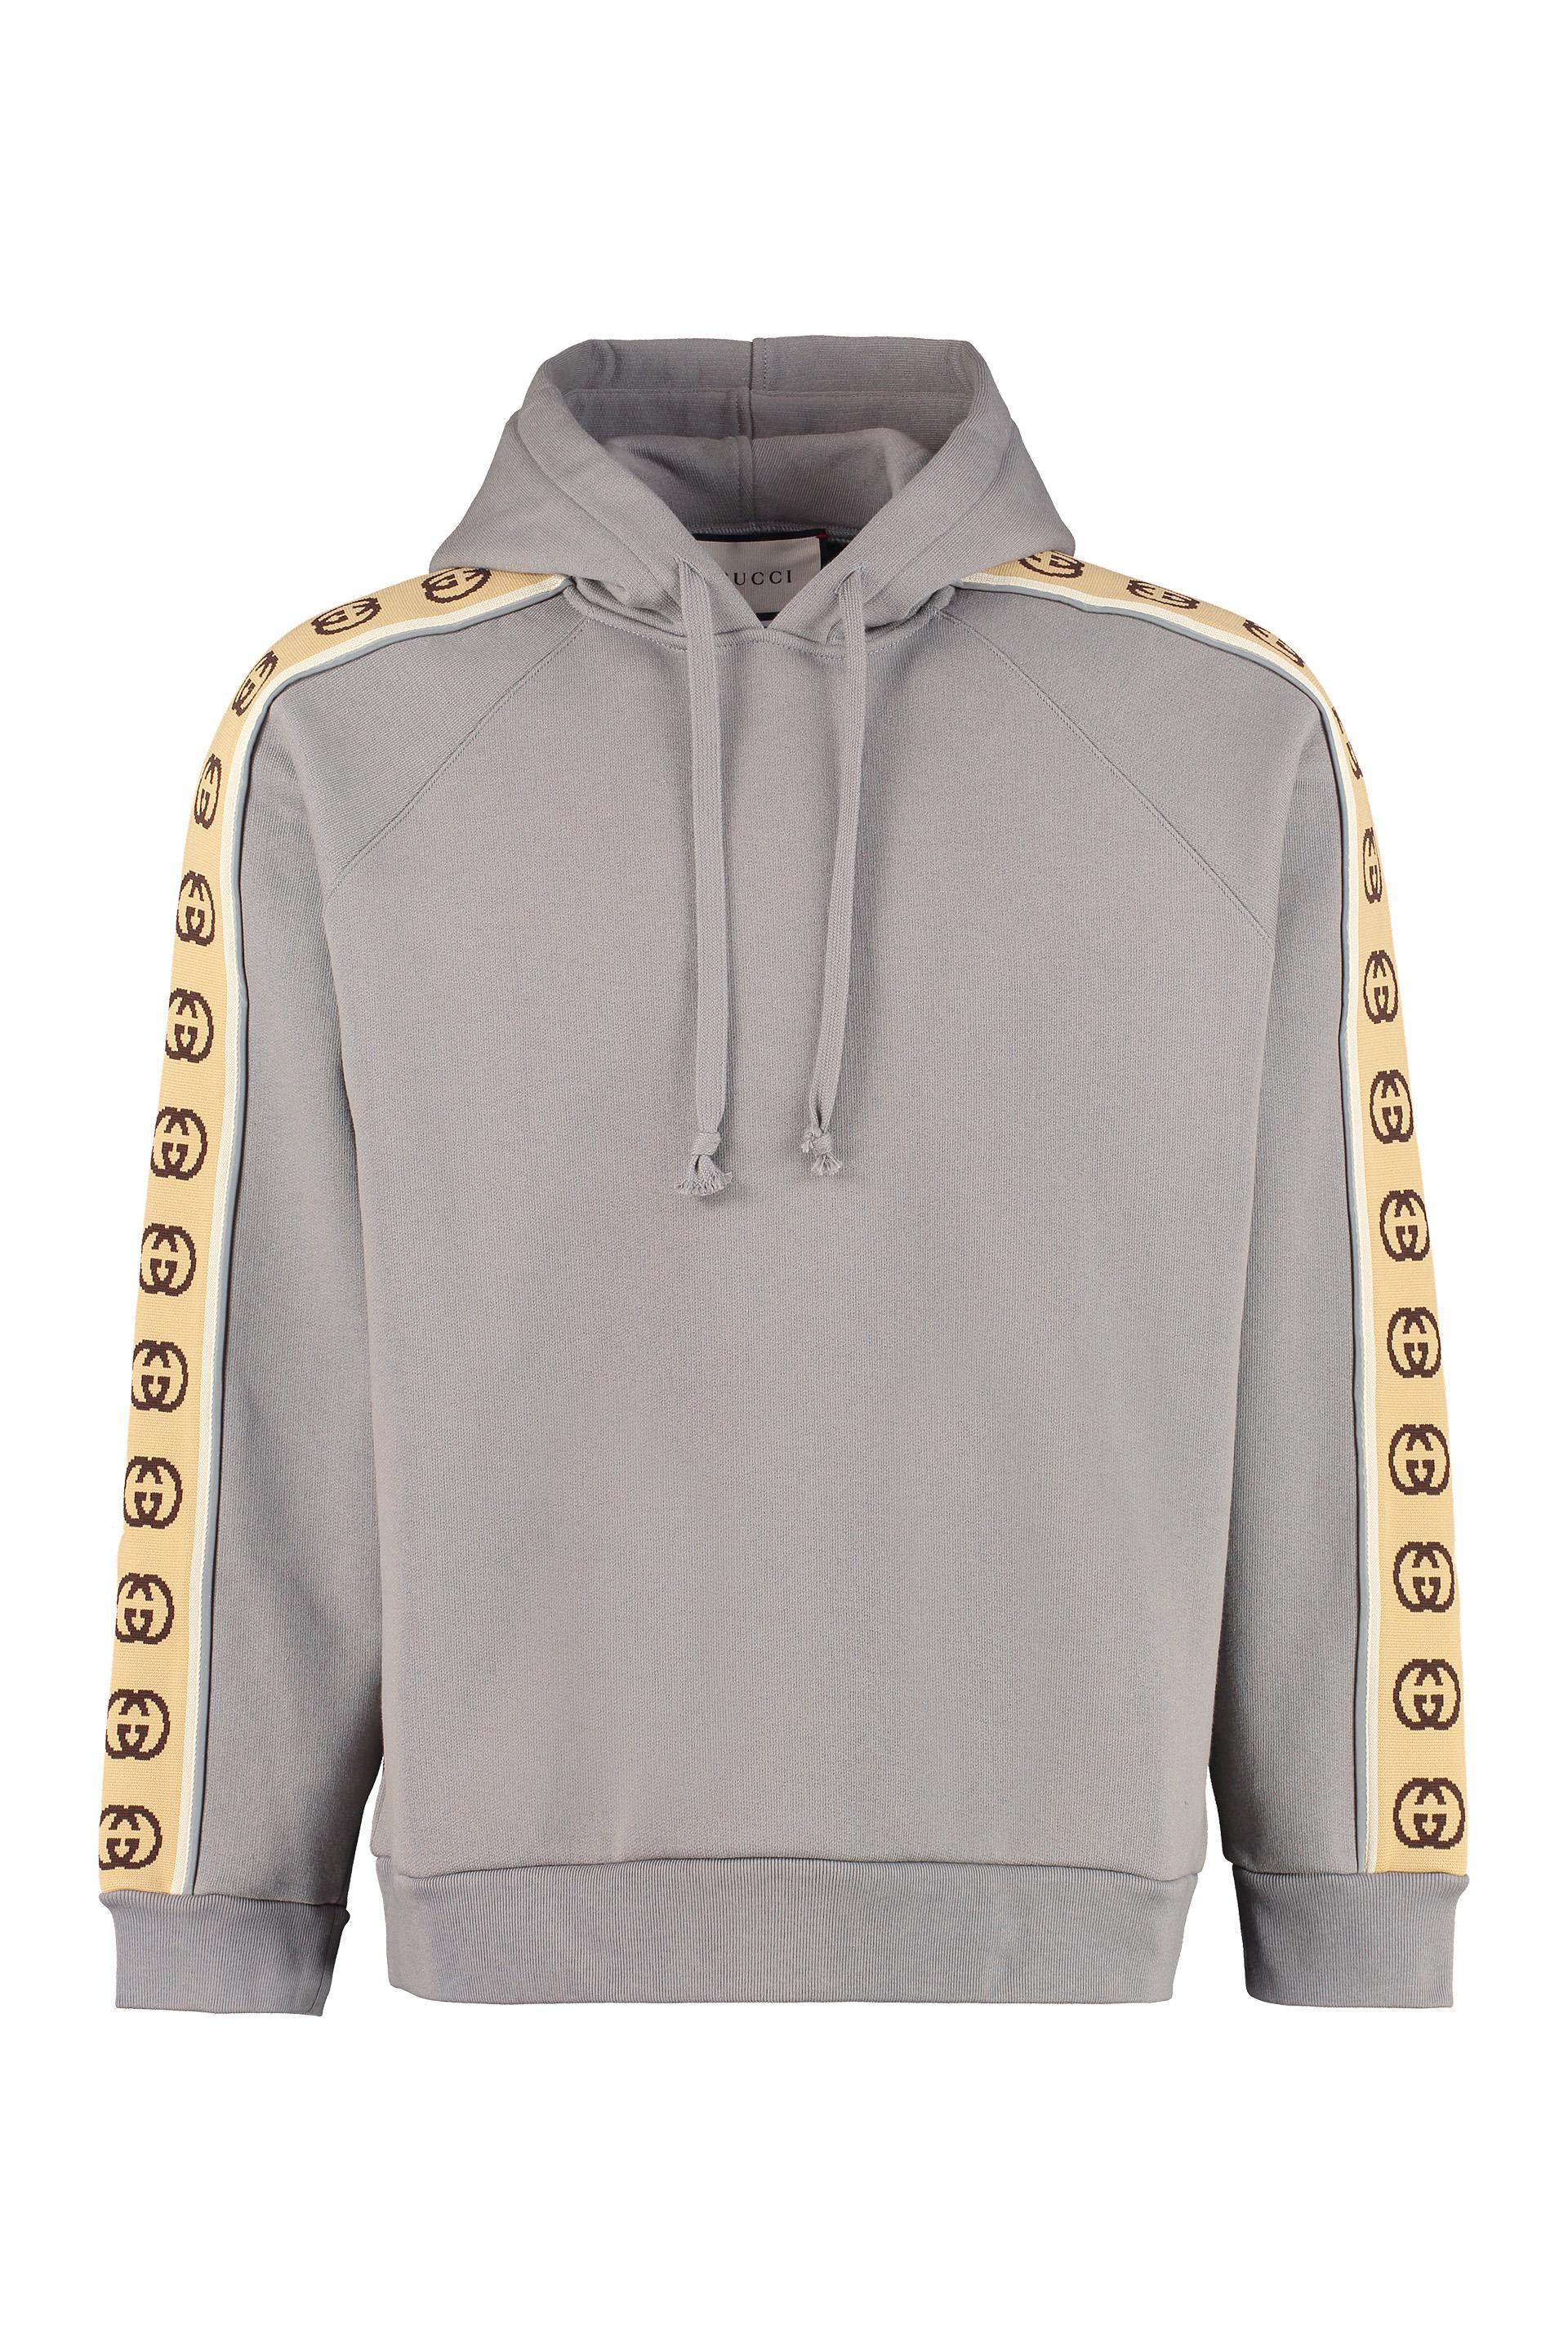 Gucci Logo-tape Cotton-jersey Hoody in Grey (Gray) for Men - Save 22% ...